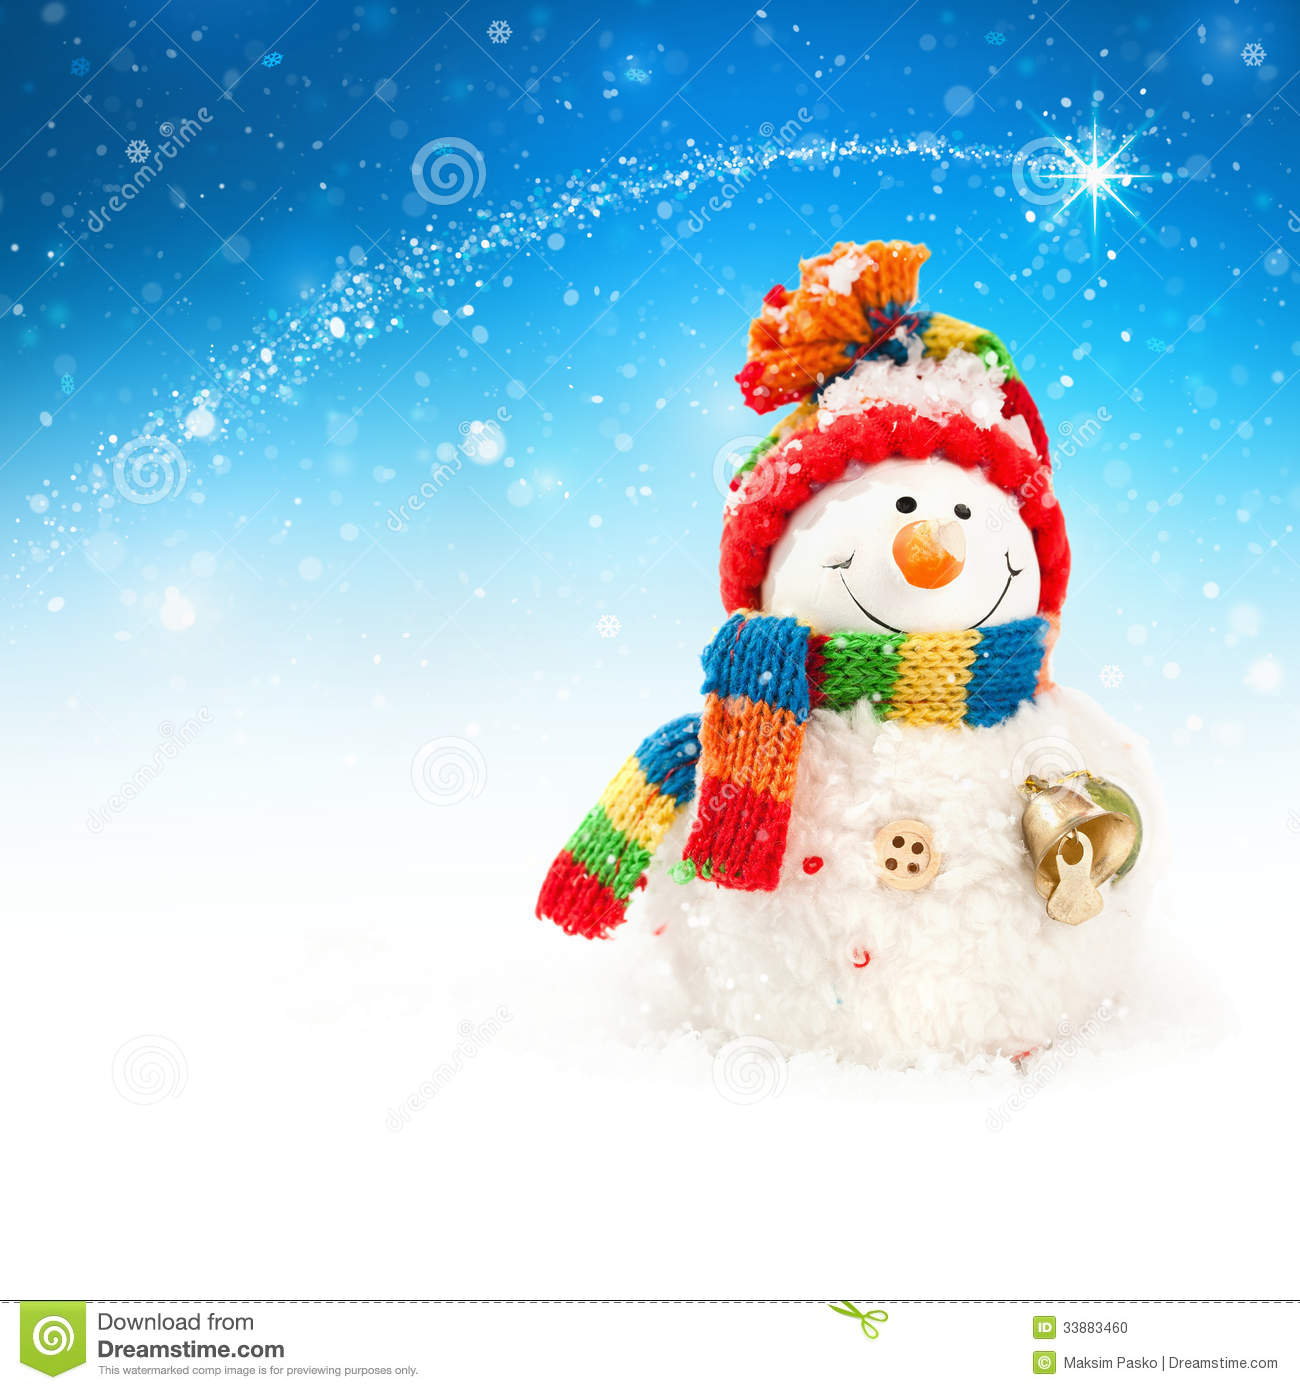 Snowman On A Blue Sky Background With Falling Snowflakes